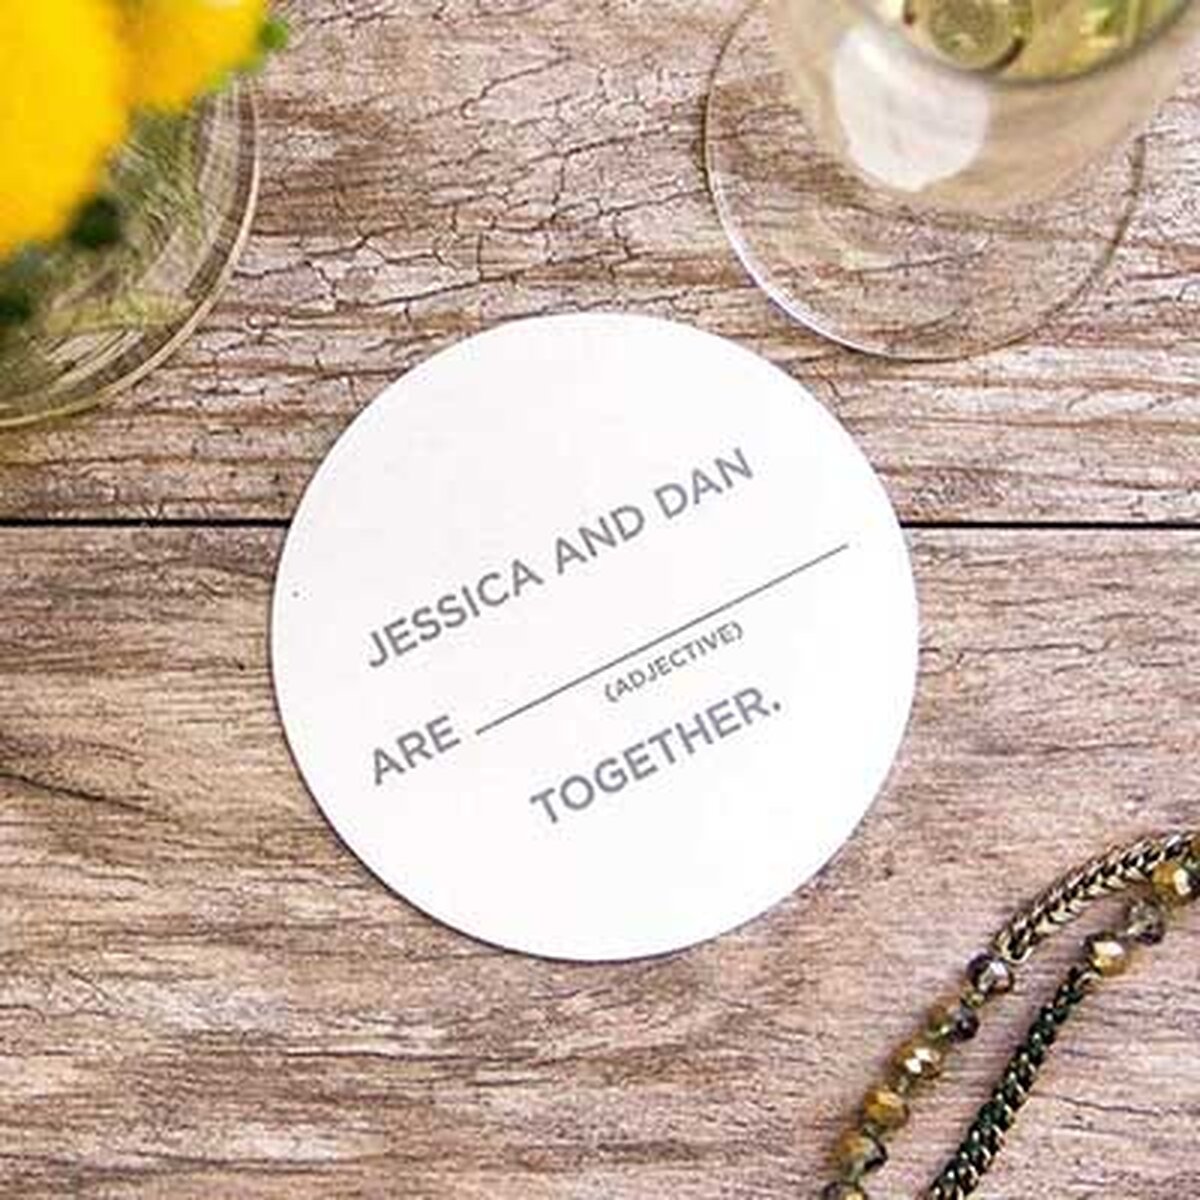 Custom Coasters Save The Date Wedding Coaster Favors For Your